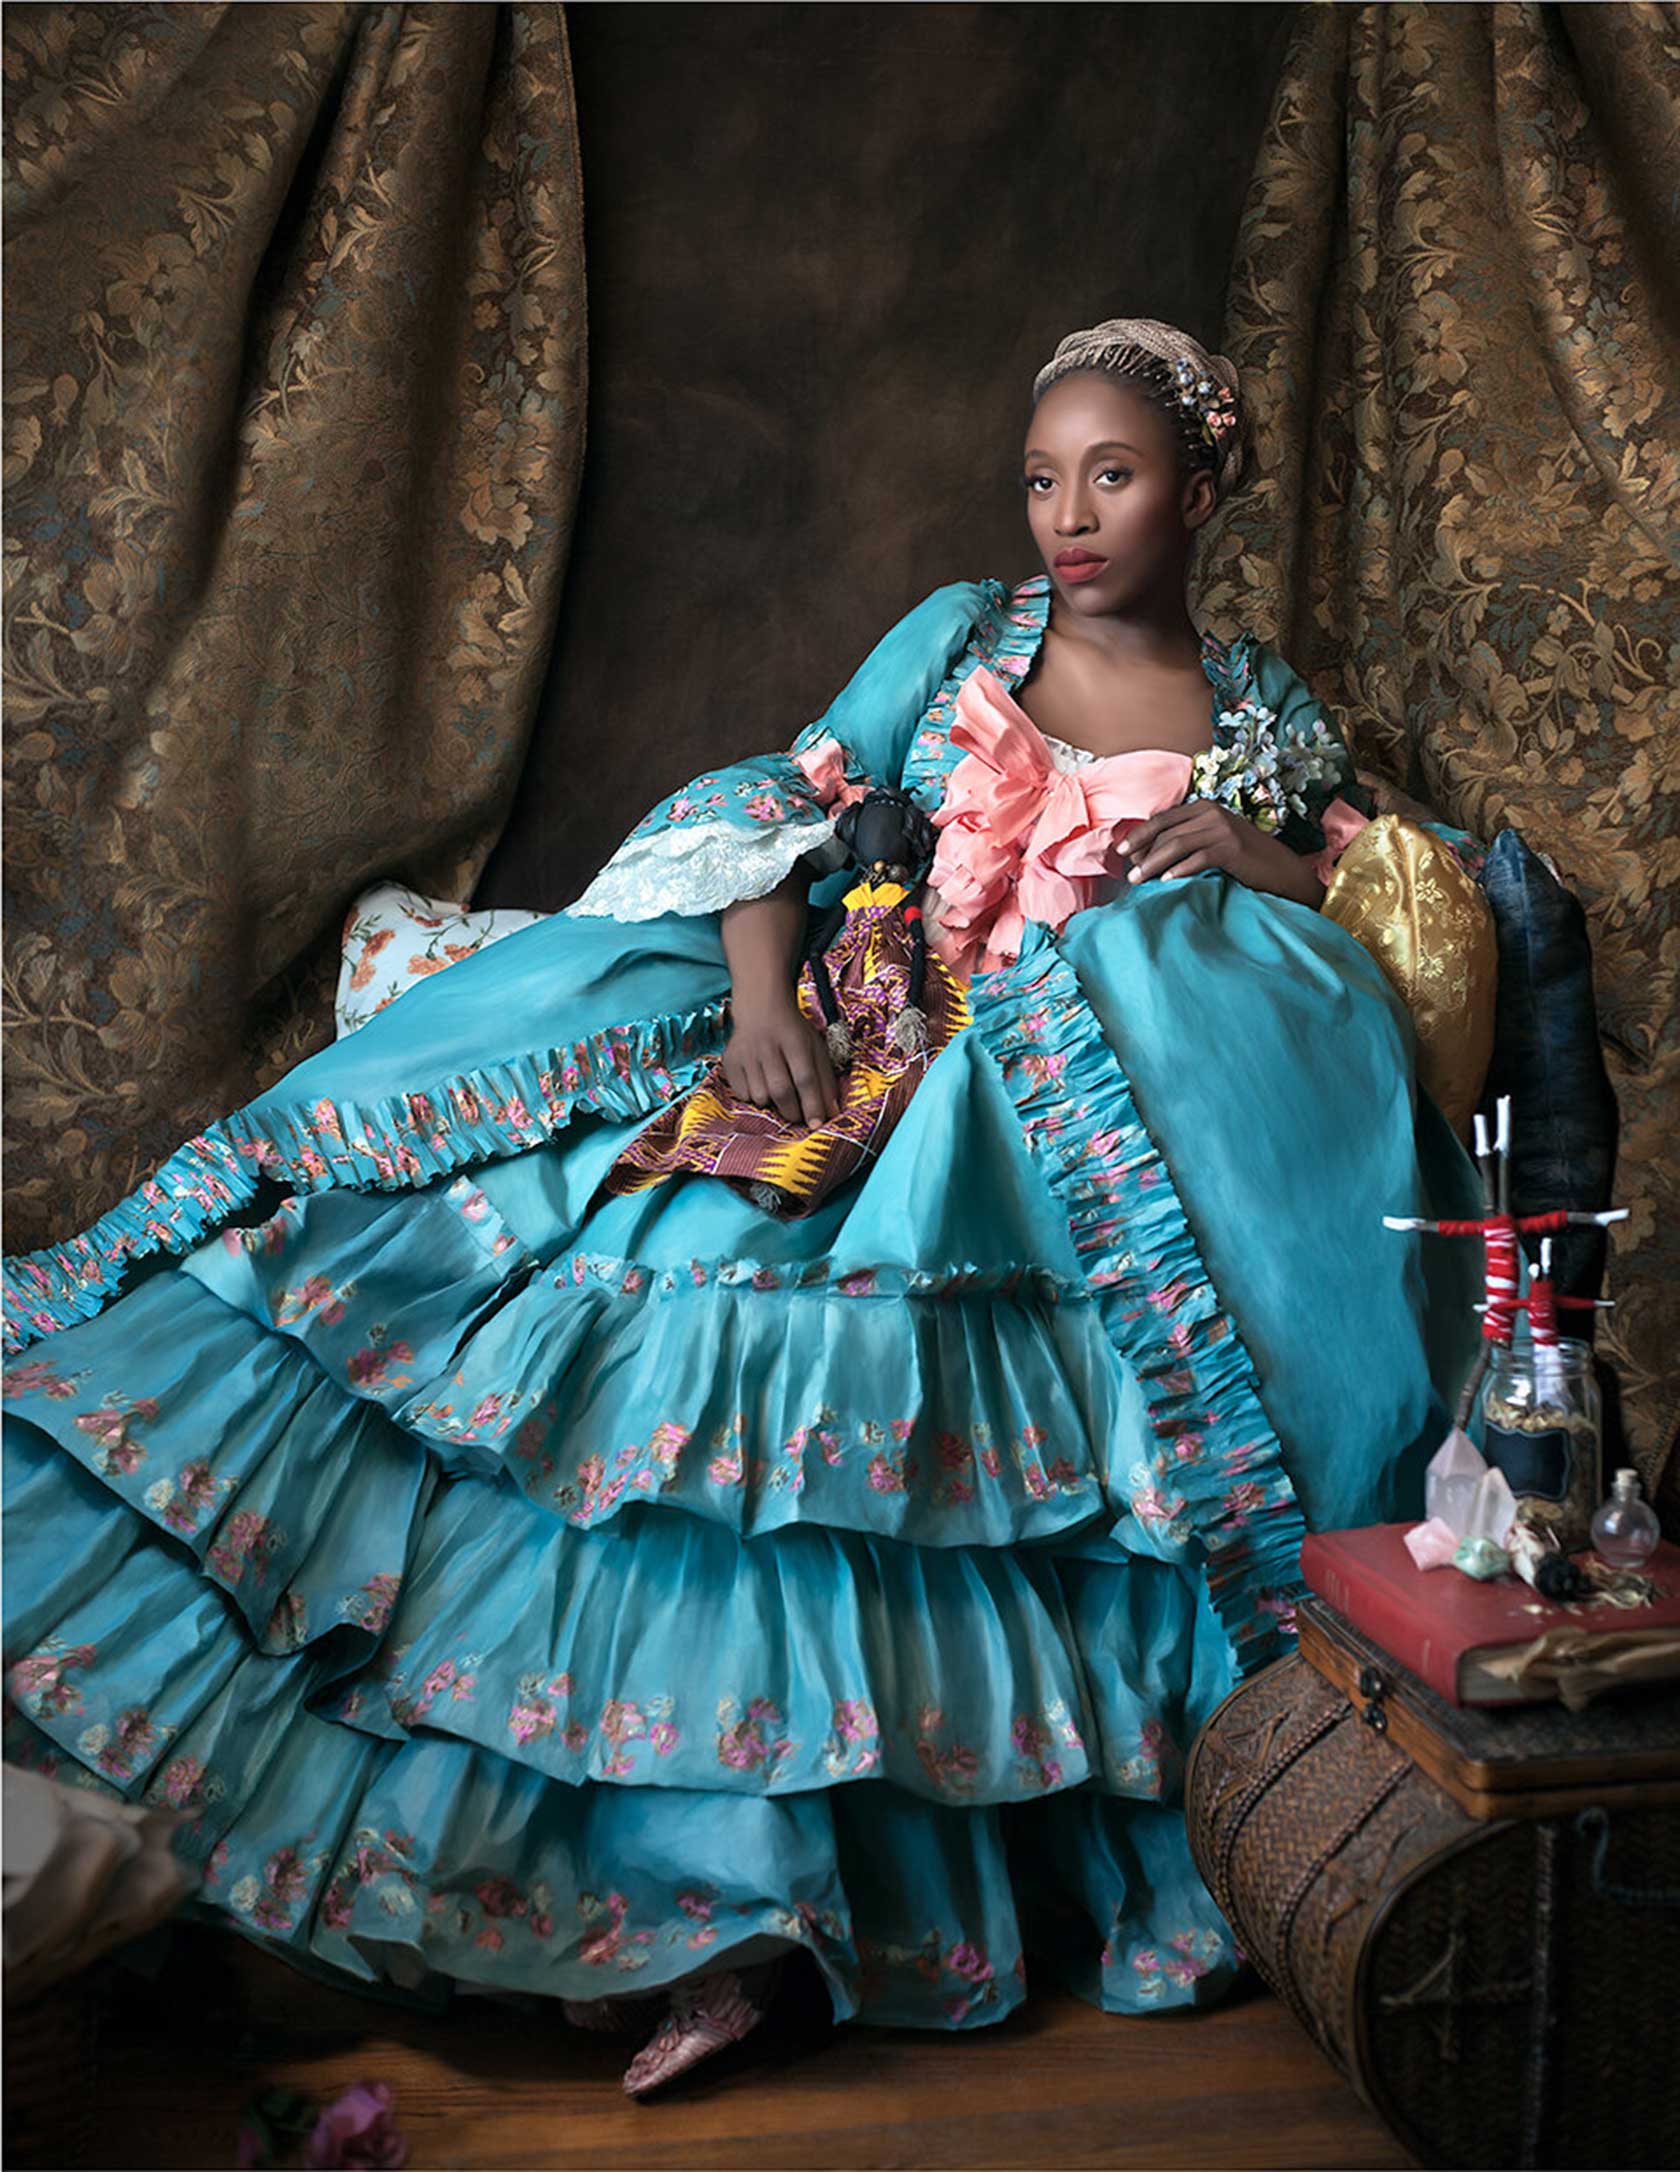 Haitian artist uses fashion to probe power structures in ‘Rewriting History’ at Gardner Museum